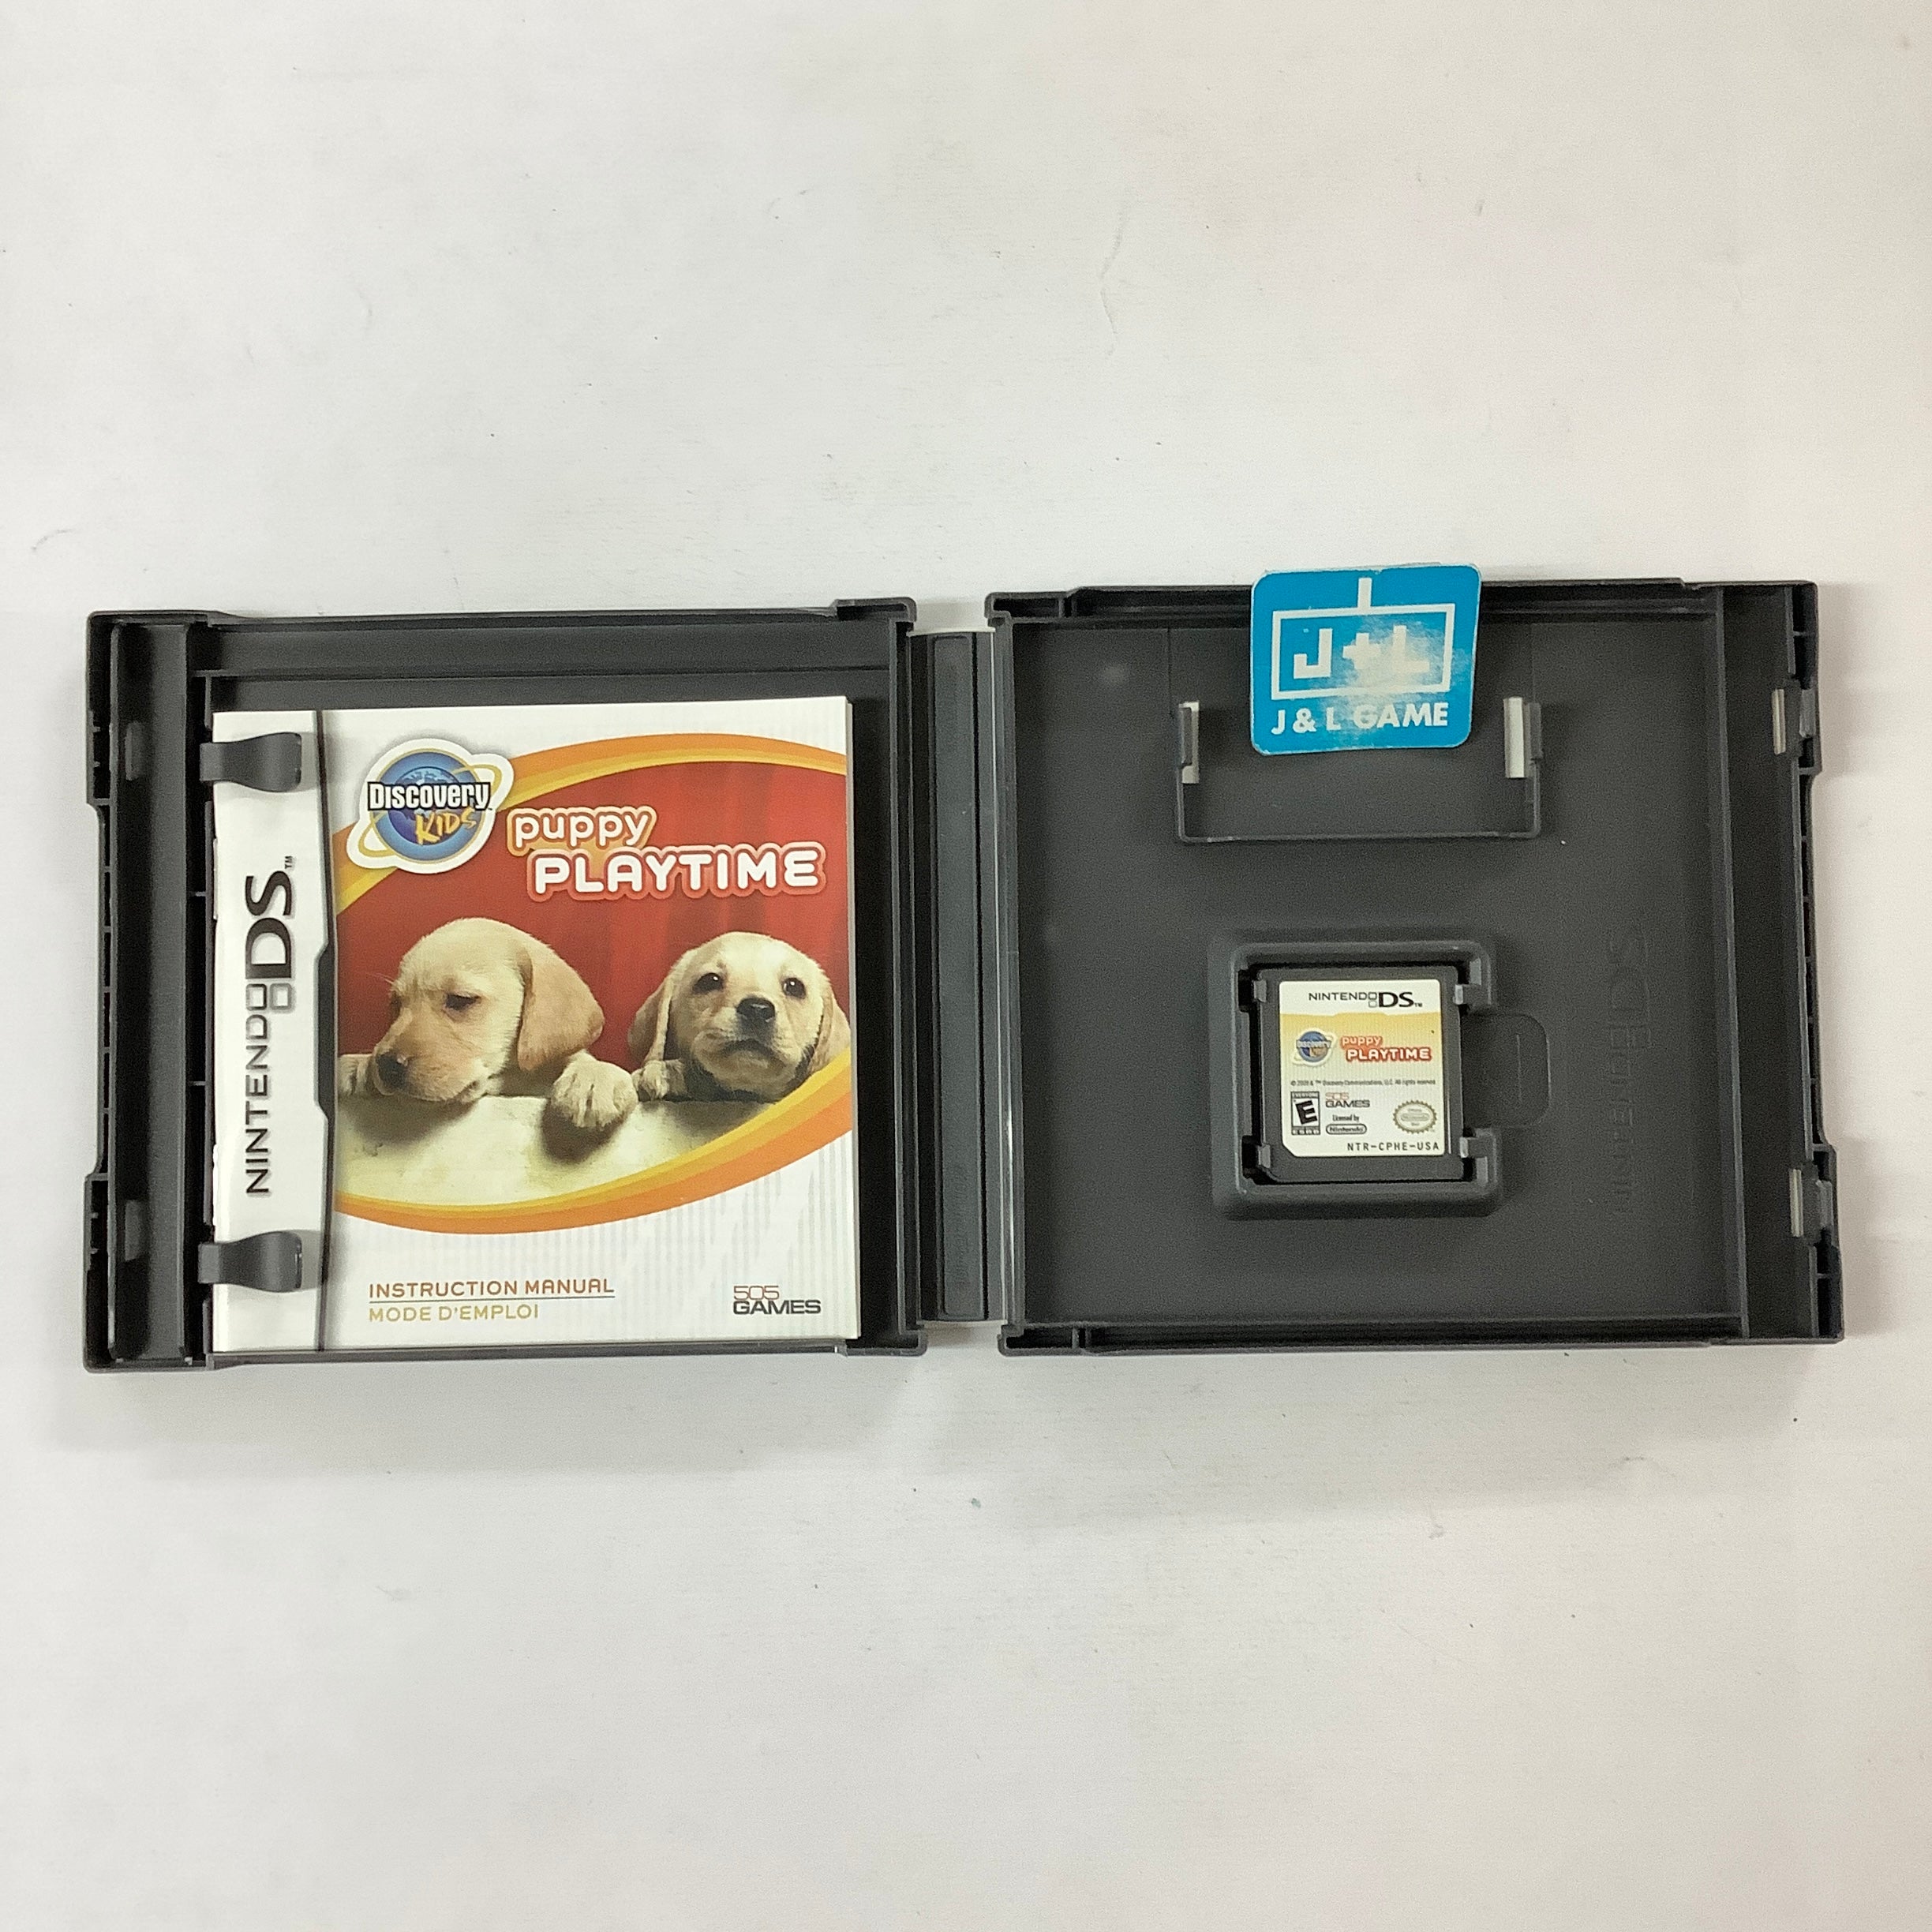 Discovery Kids: Puppy Playtime - (NDS) Nintendo DS [Pre-Owned] Video Games 505 Games   